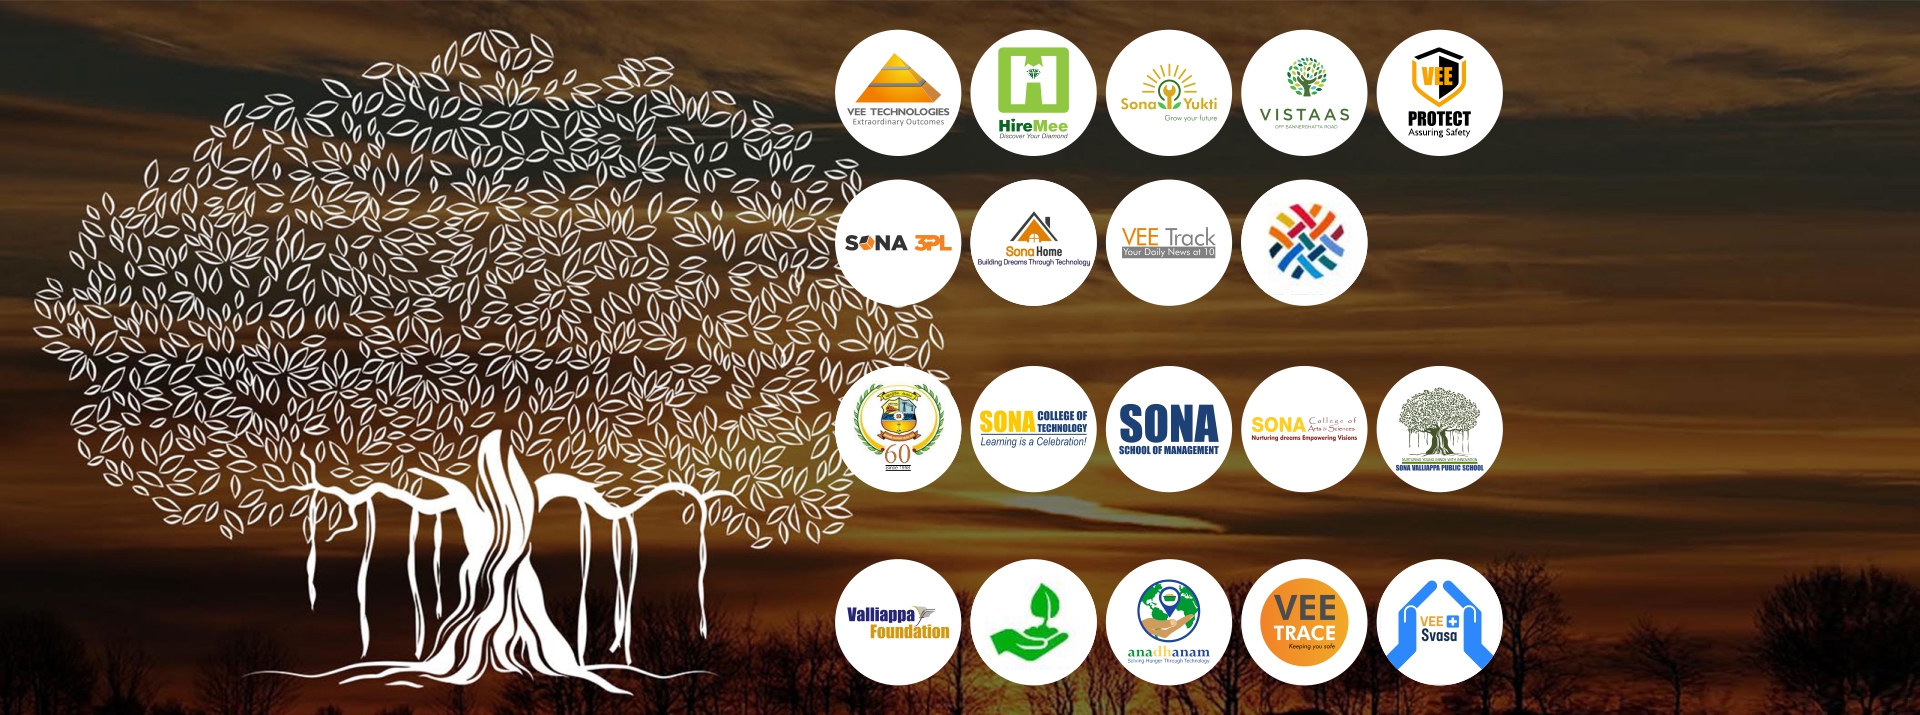 Eclectic Nature of The Sona Group: A Comprehensive Look at the Group’s Range of Businesses